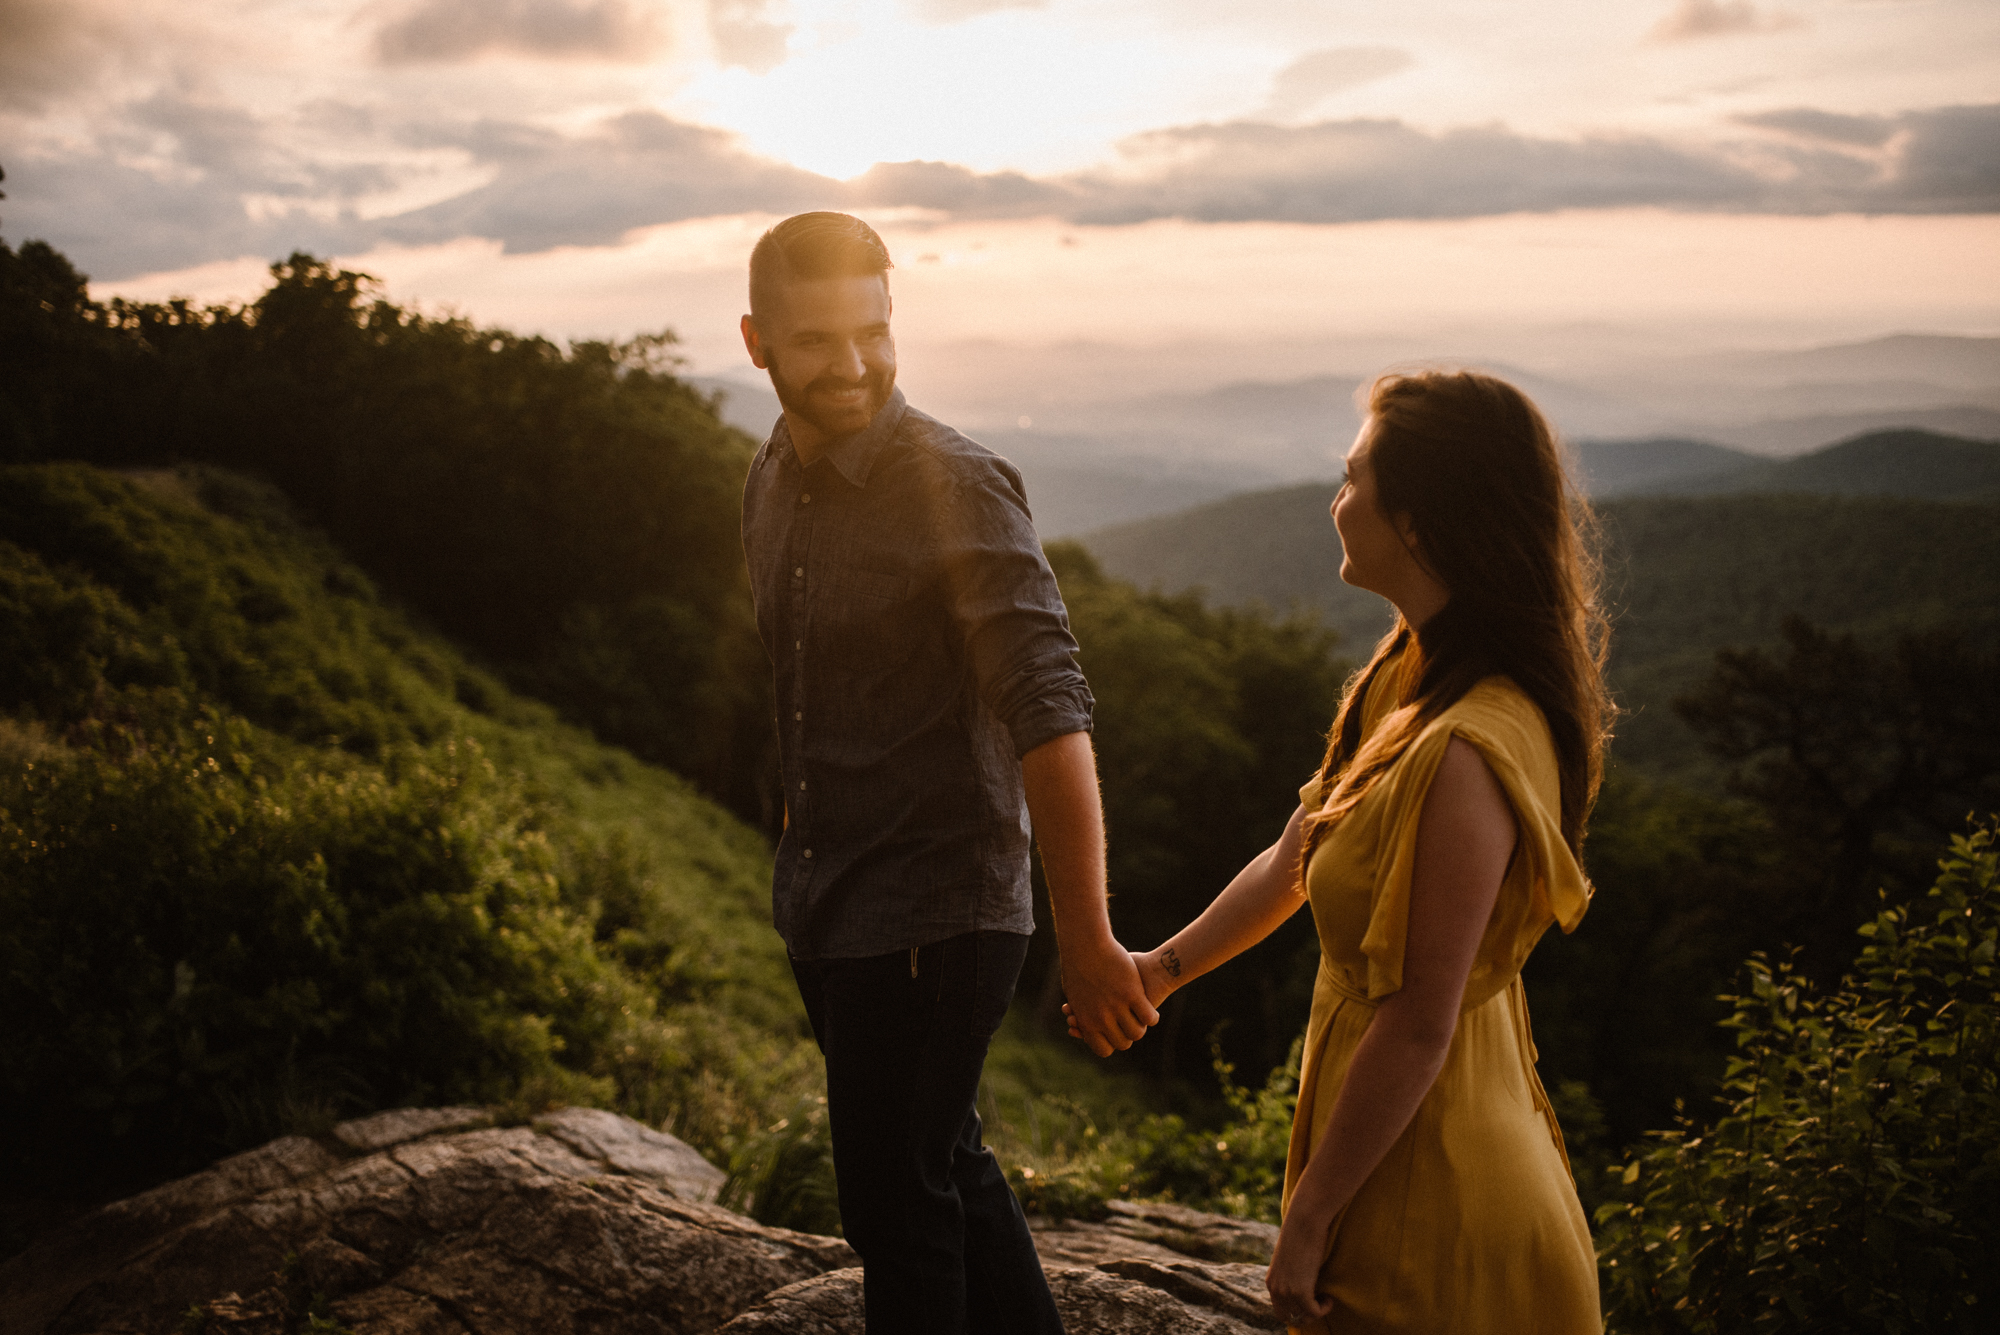 Camryn and Larry Sunrise Engagement Session in Shenandoah National Park - Things to Do in Luray Virginia - Adventurous Couple Photo Shoot White Sails Creative_12.jpg